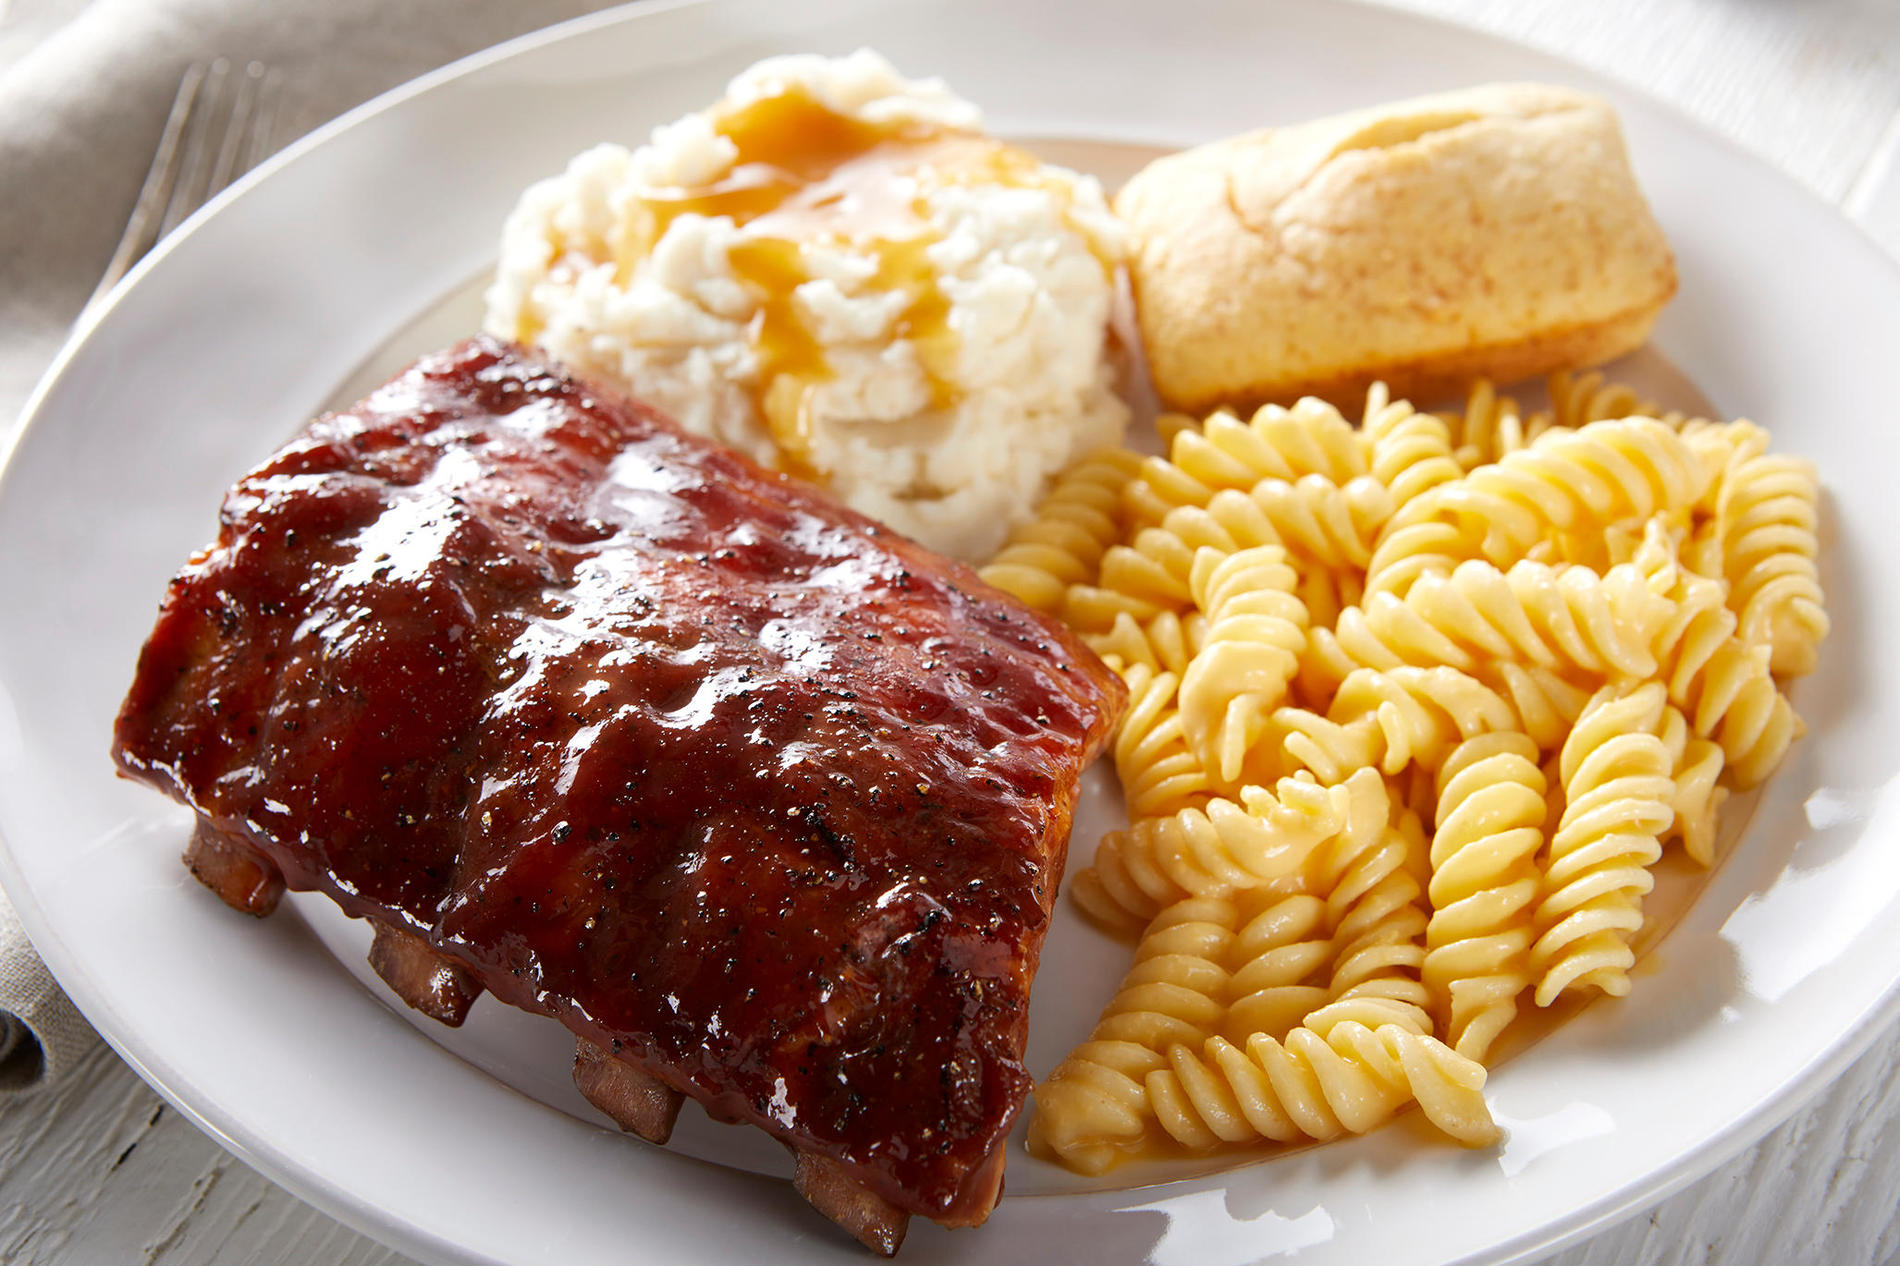 New! Baby Back Ribs. Our slow-cooked, fall-off-the-bone Baby Back Ribs are seasoned then brushed with sweet hickory BBQ sauce.